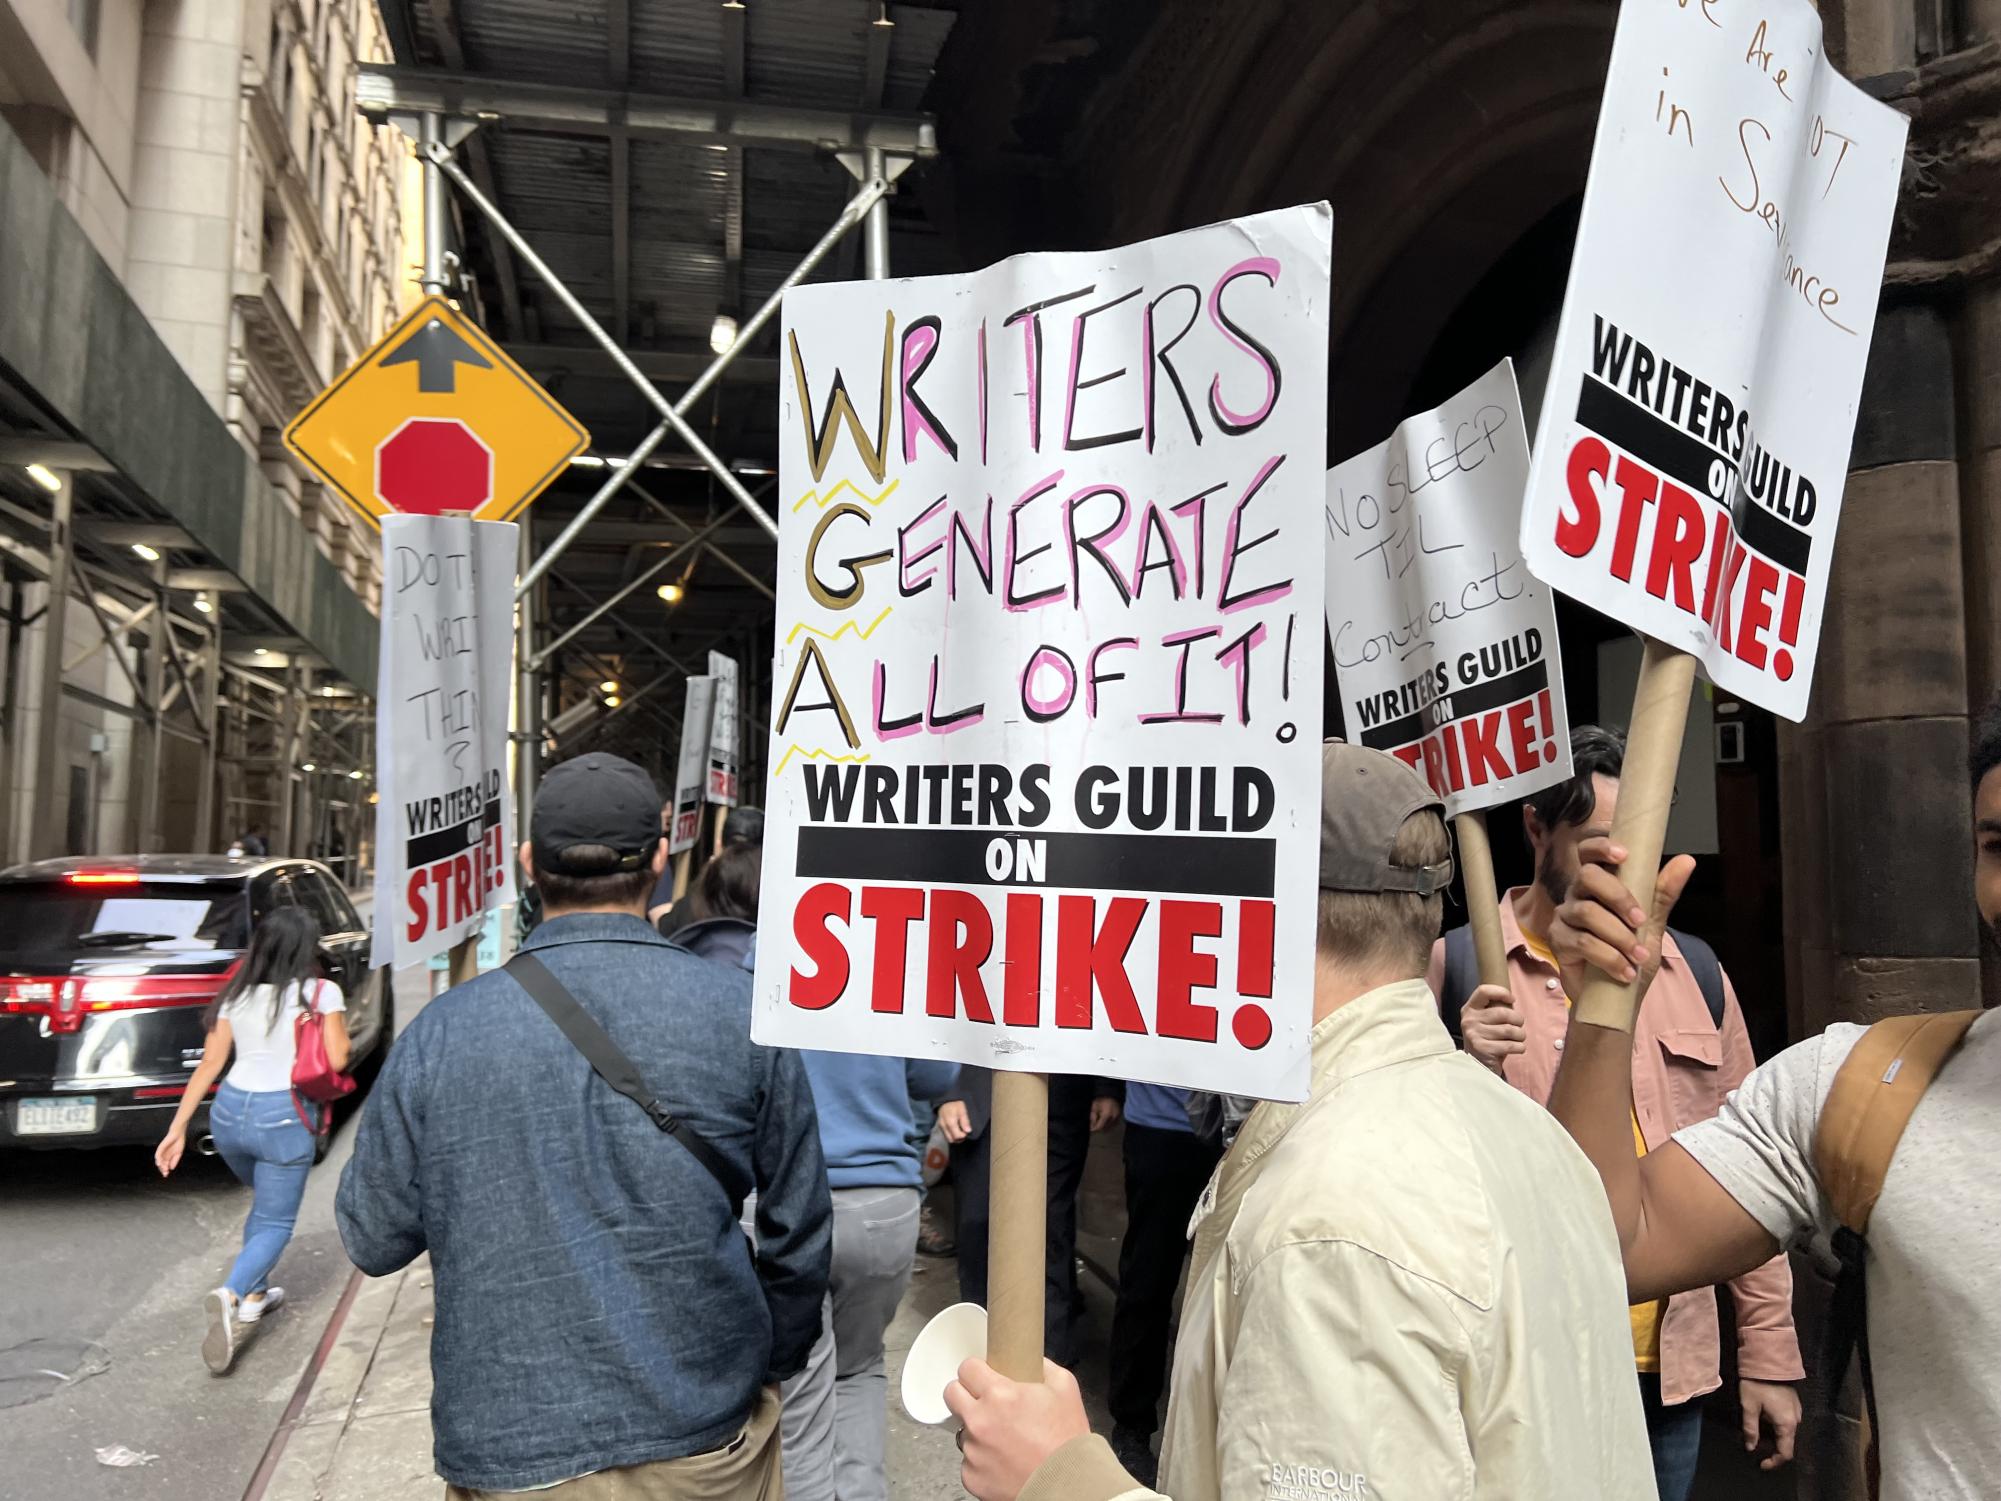 The writers strike disrupted streaming services and the industry as a whole for months